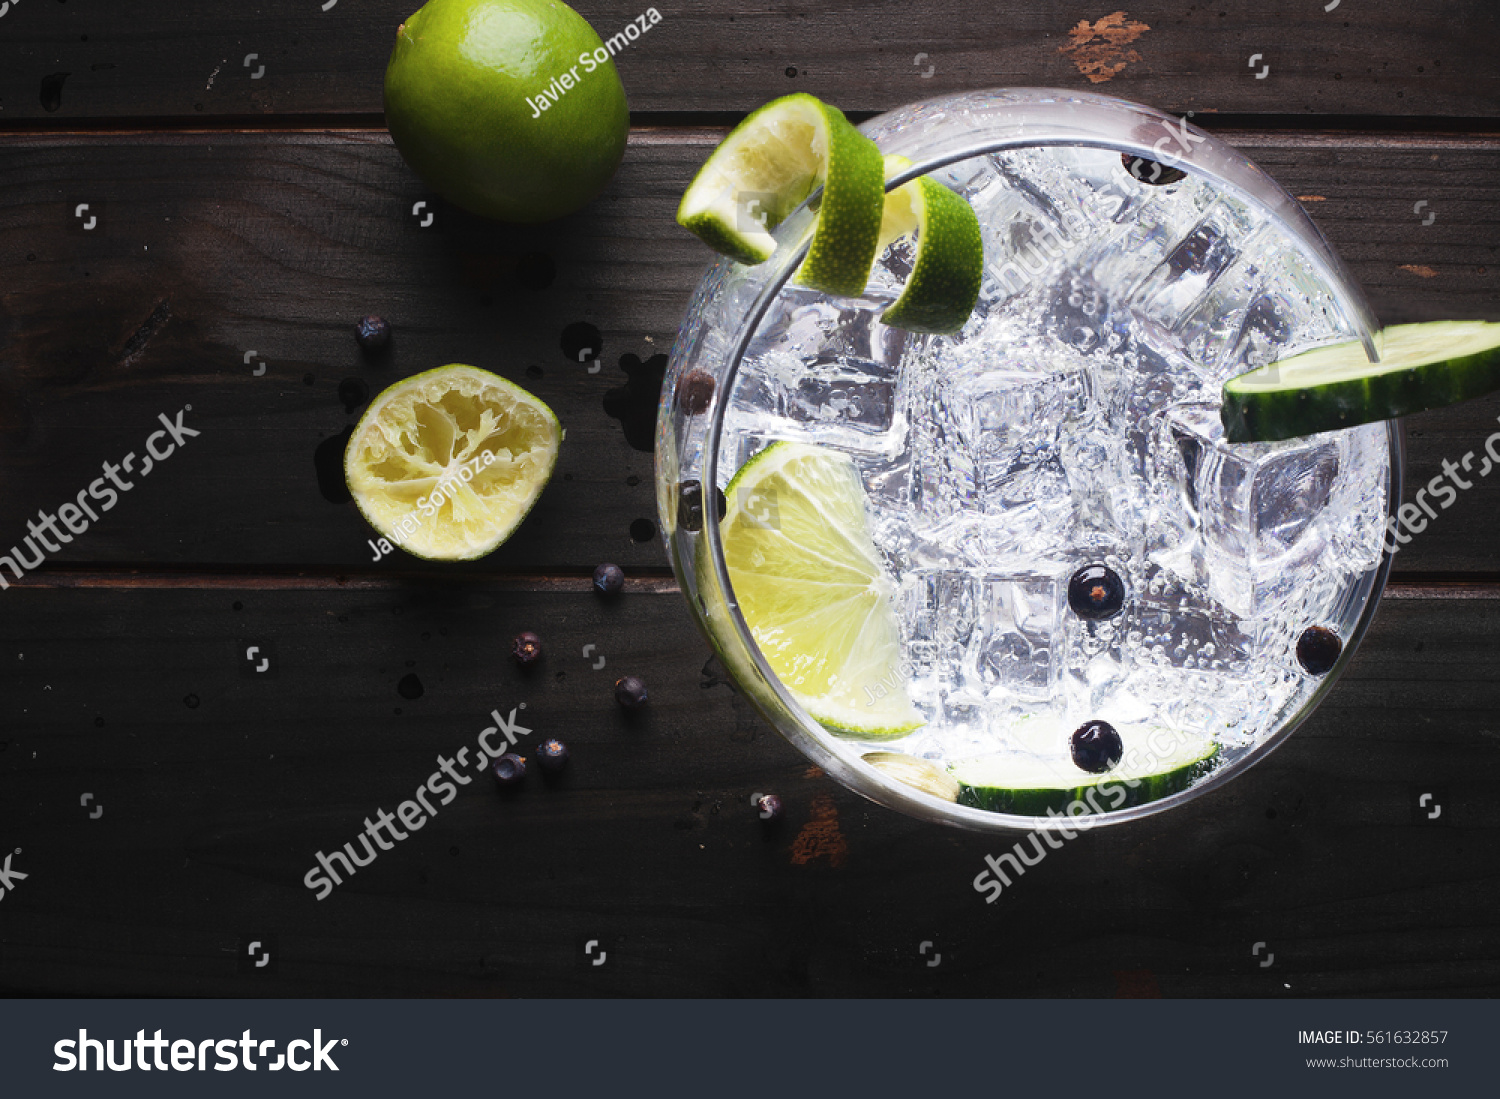 Glass of gin tonic with cucumber, lime and ice over a wooden table #561632857